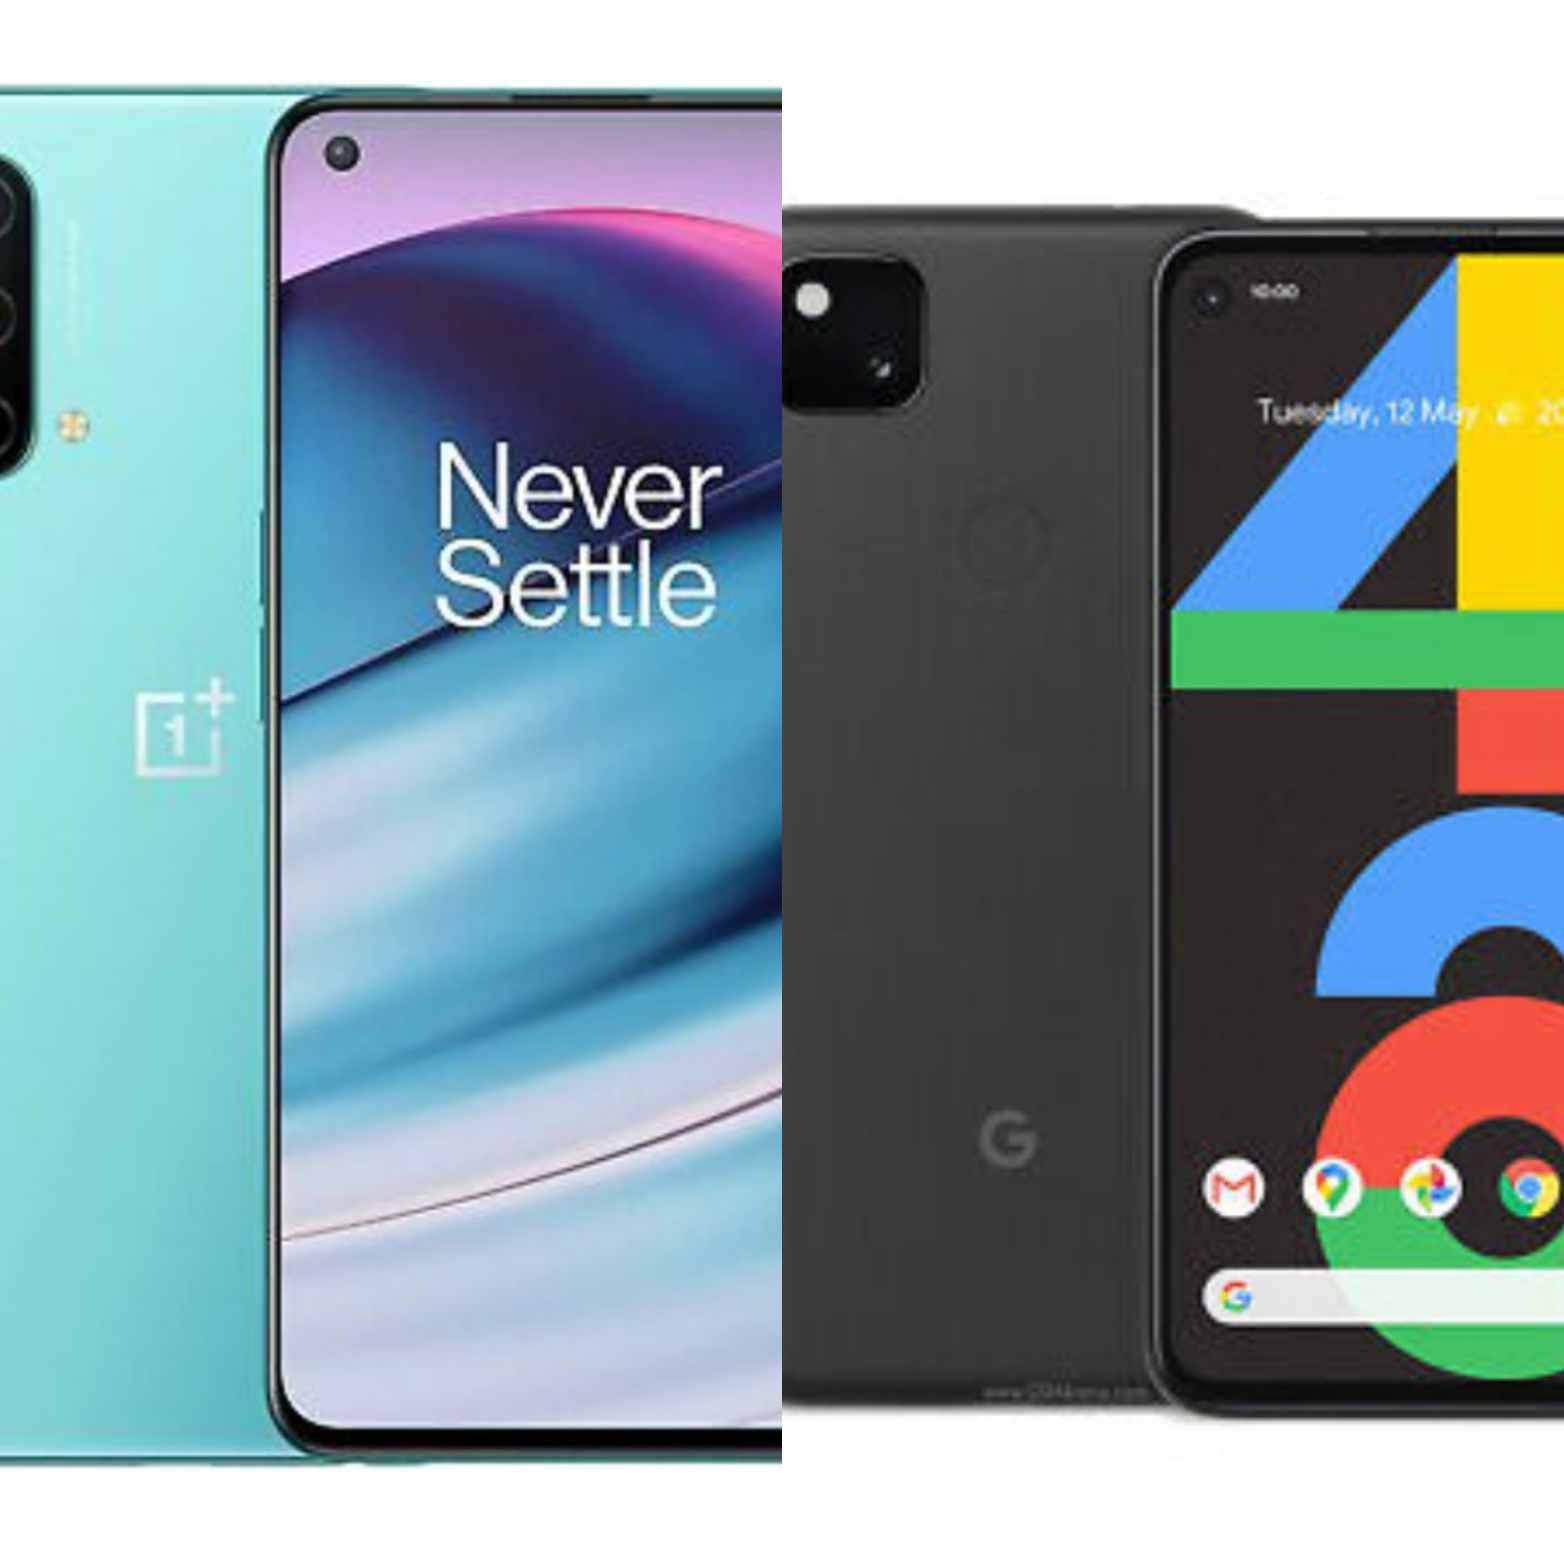 OnePlus Nord CE 5G vs Google Pixel 4a 5G: Which should you buy